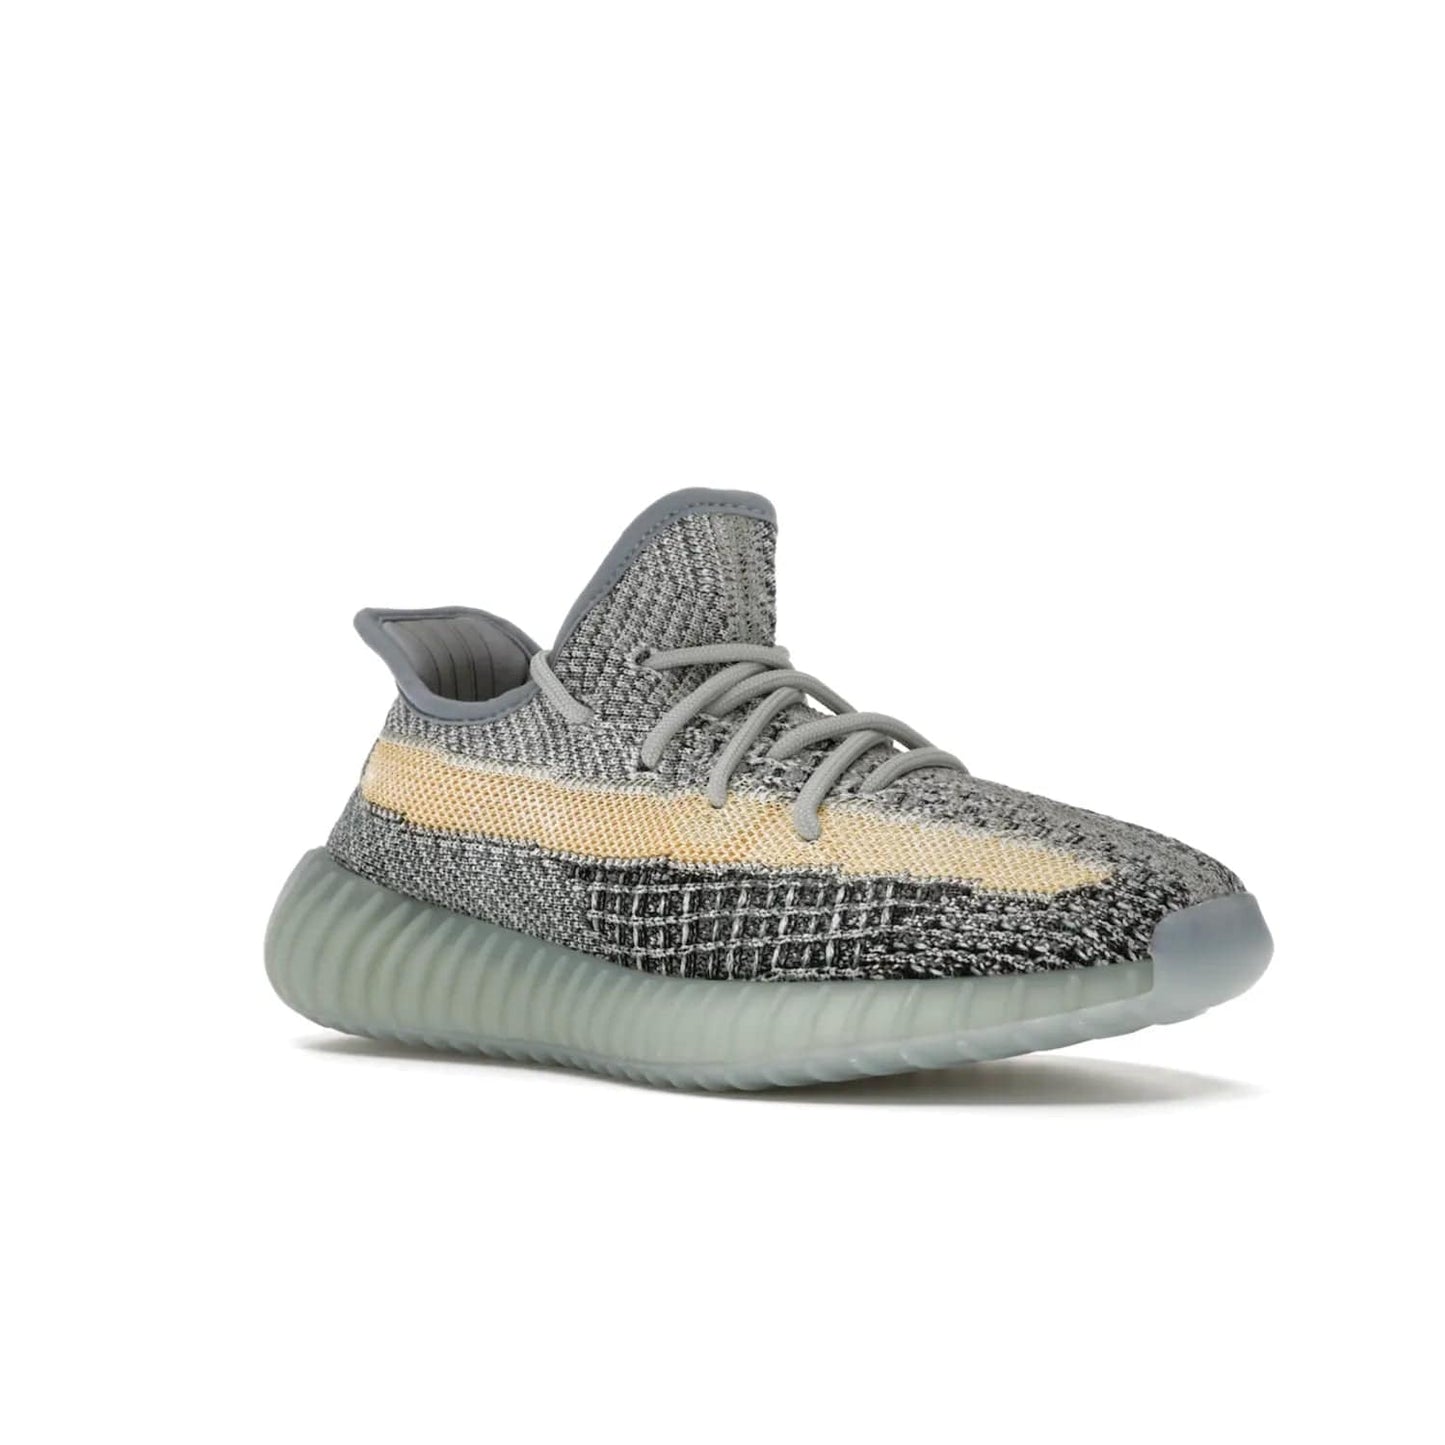 adidas Yeezy Boost 350 V2 Ash Blue - Image 5 - Only at www.BallersClubKickz.com - Must-have design made of engineered primeknit upper, comfortable sock-like upper and full-length Boost midsole, and semi-translucent rubber cage for added durability and style. The adidas Yeezy Boost 350 V2 Ash Blue blends timeless colors and comfort.